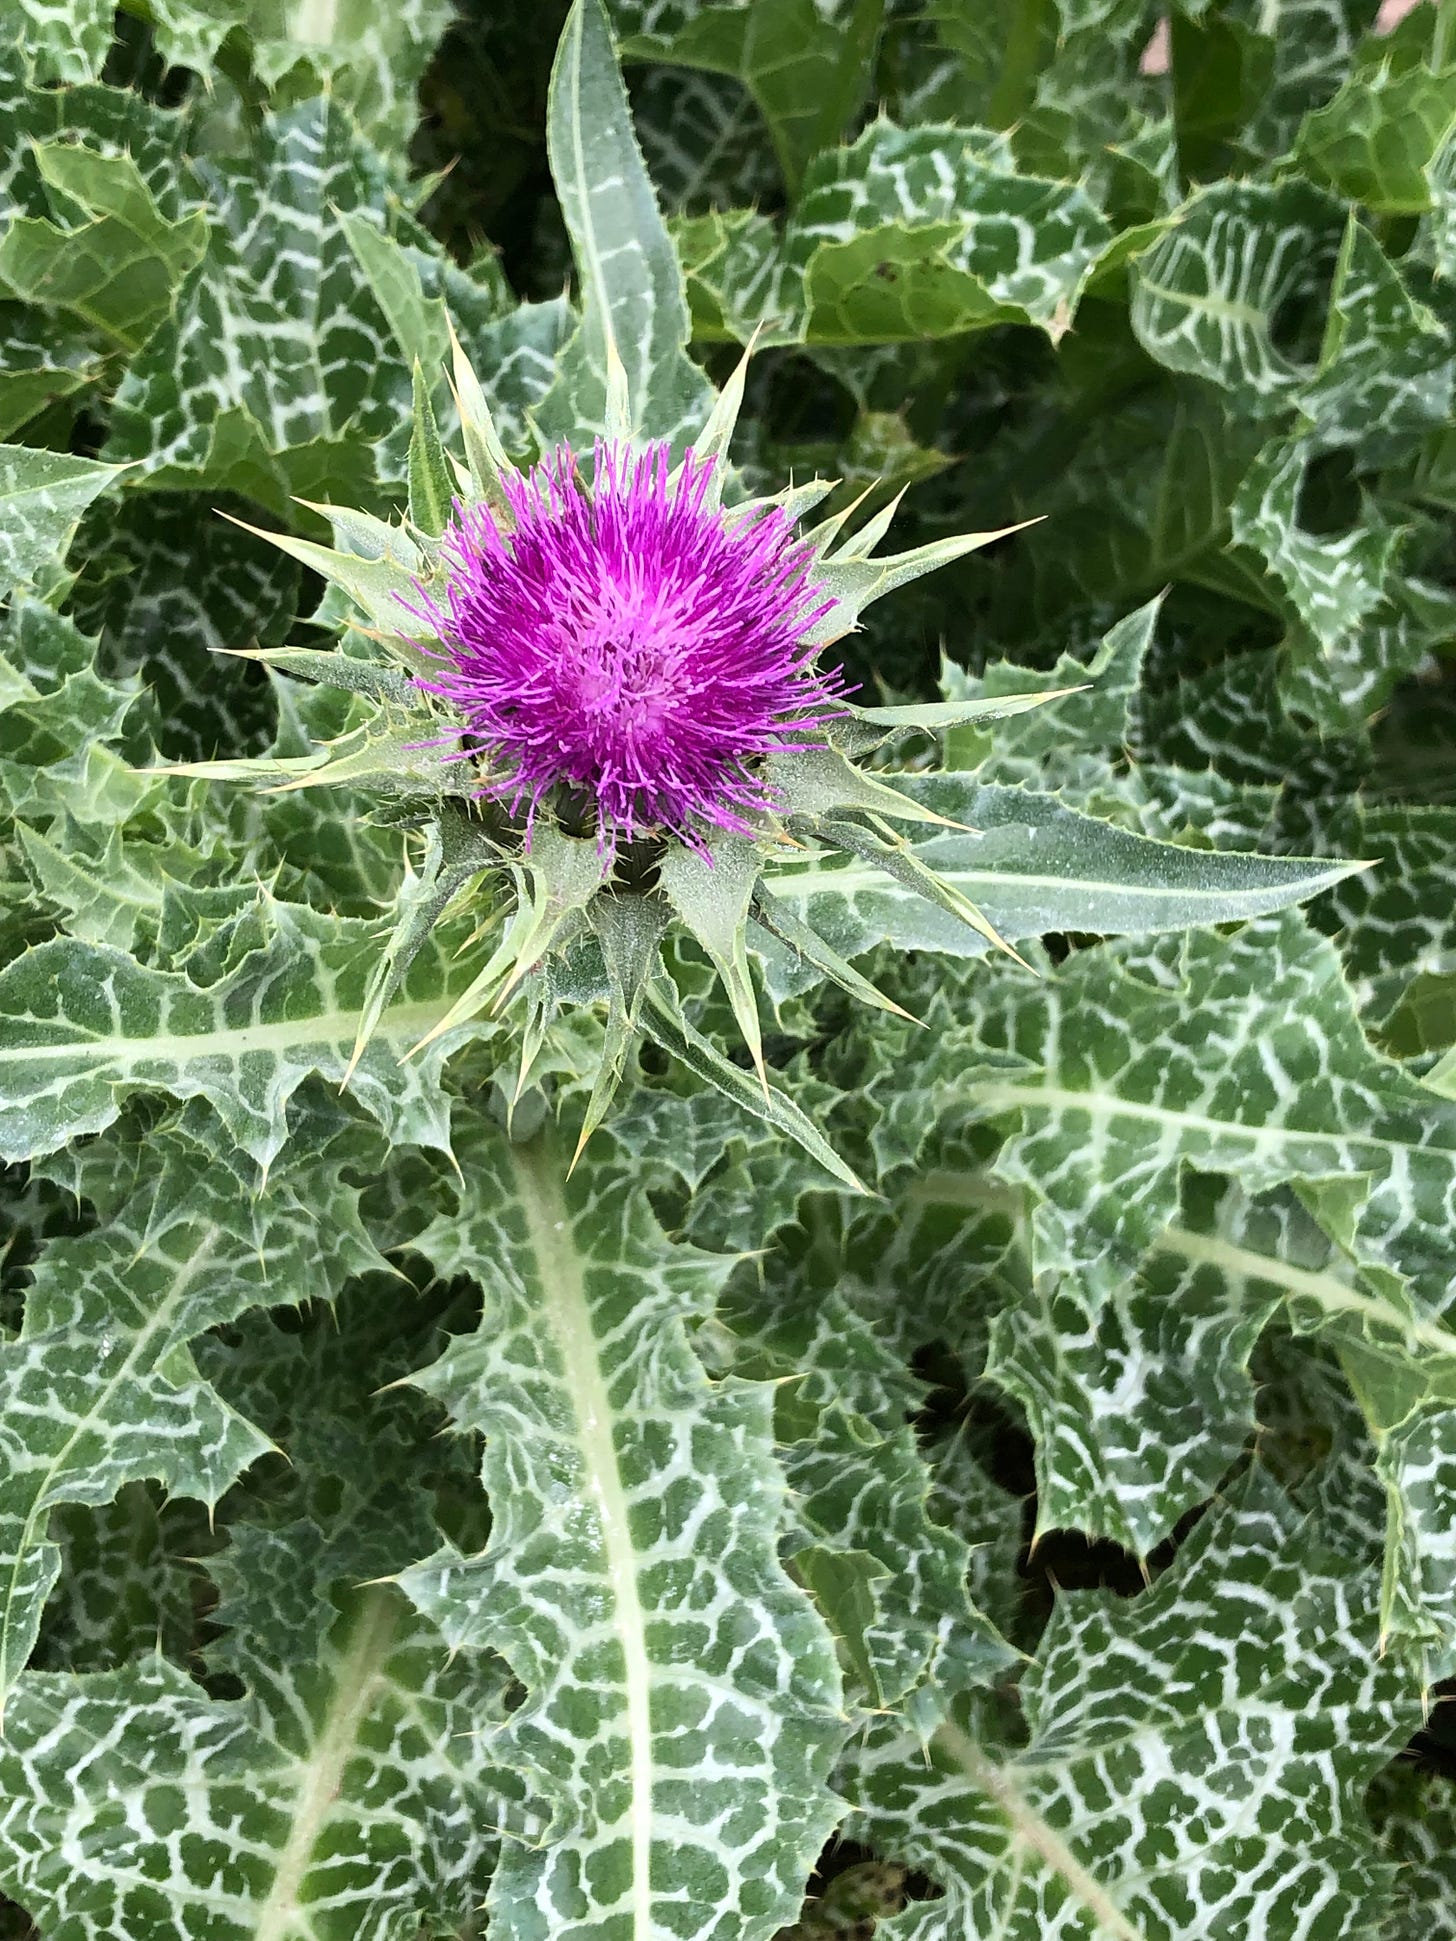 A milky thistle with one purple flower in the center of prickly, white-veined leaves.